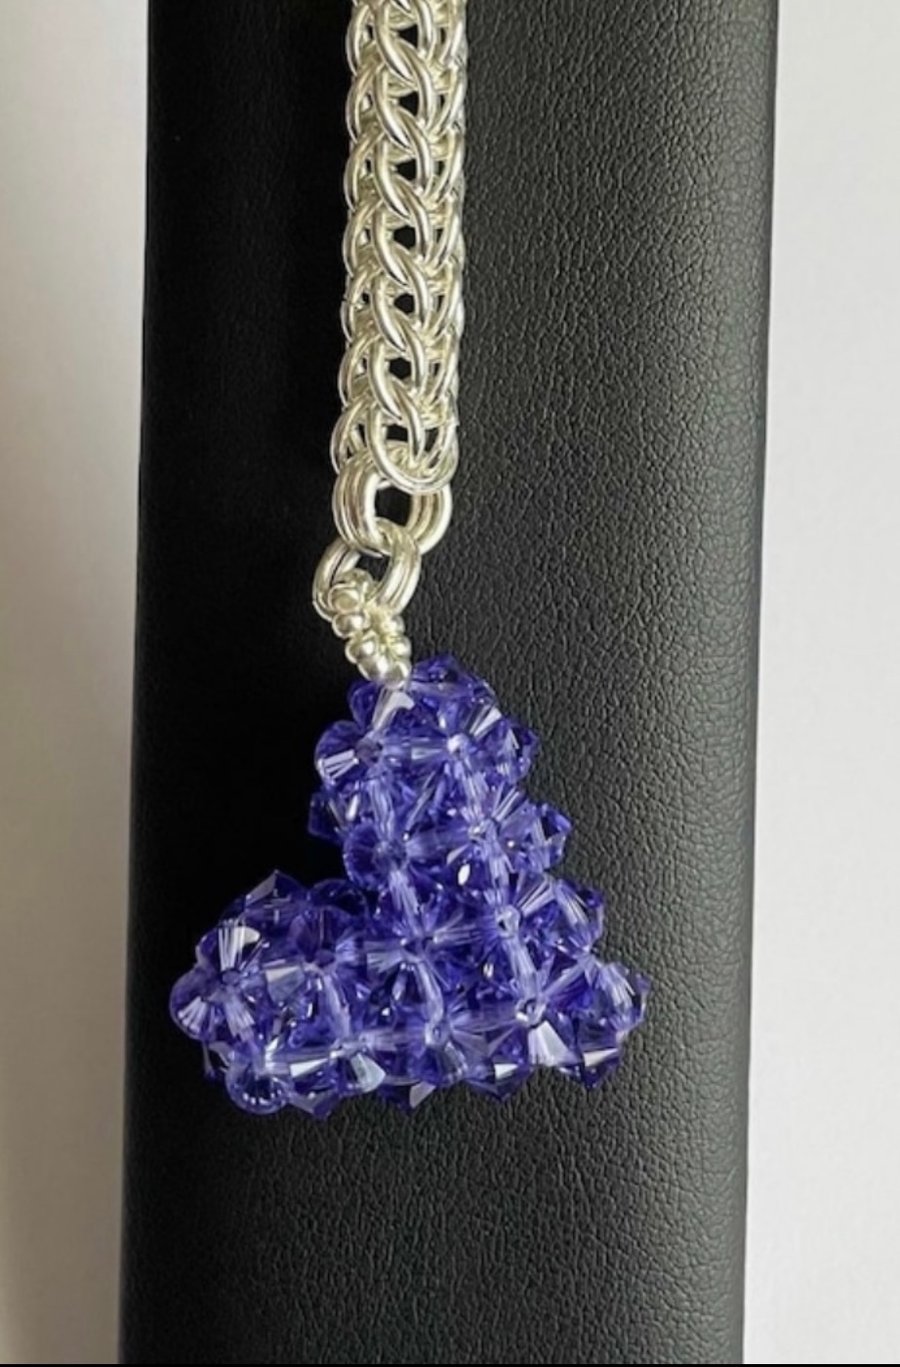 Handbag Charm, Purple Crystal Puffed Heart, with a Chainmaille Chain and Keyring